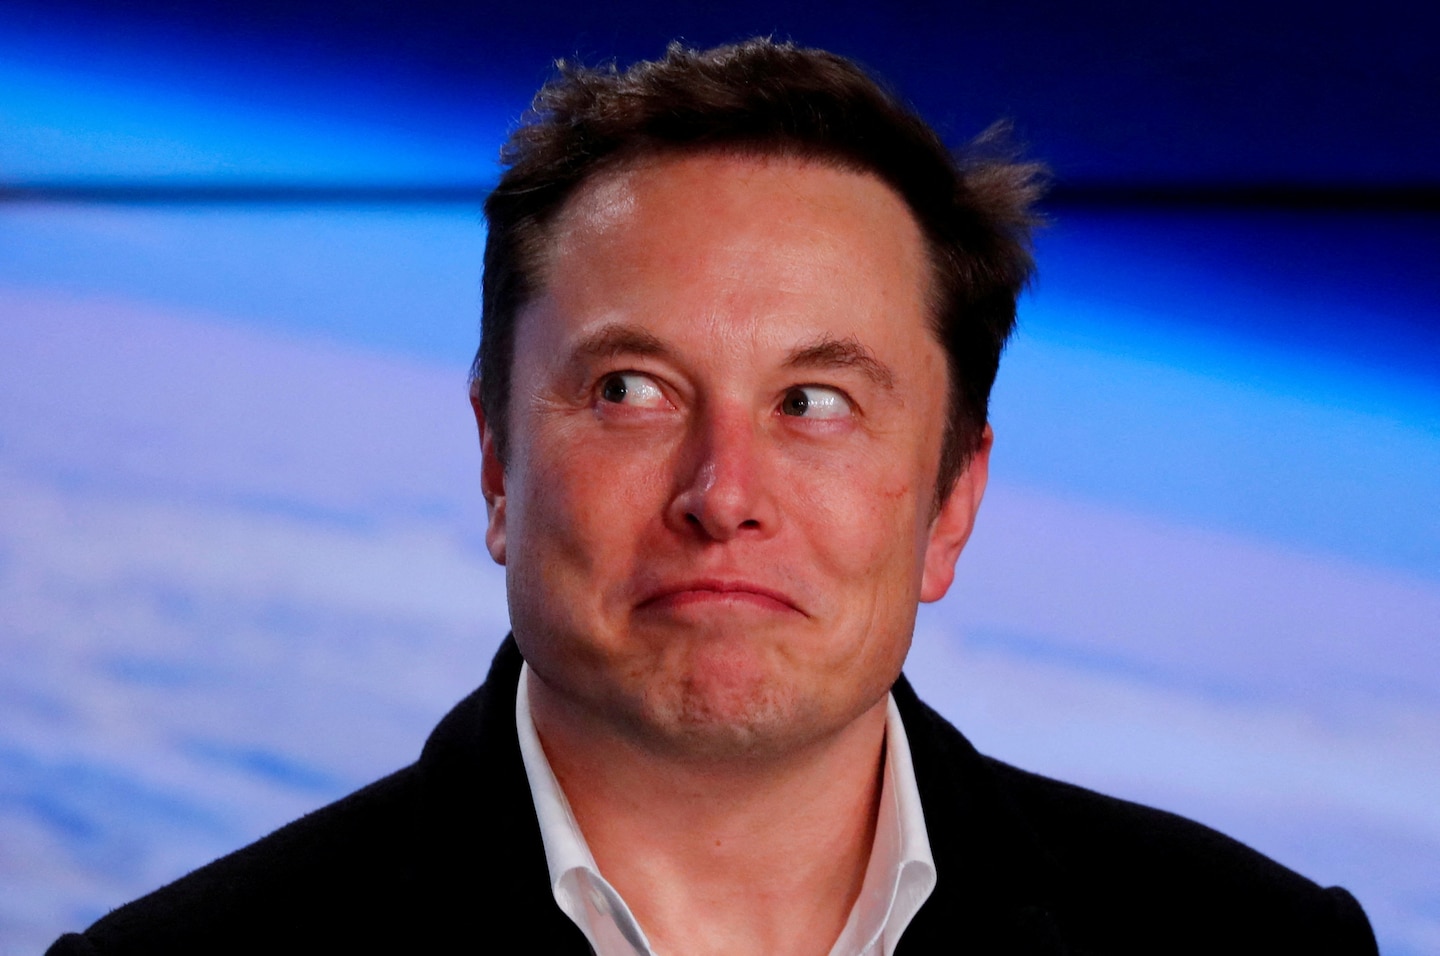 No, Elon Musk can’t bring Trump back to Twitter